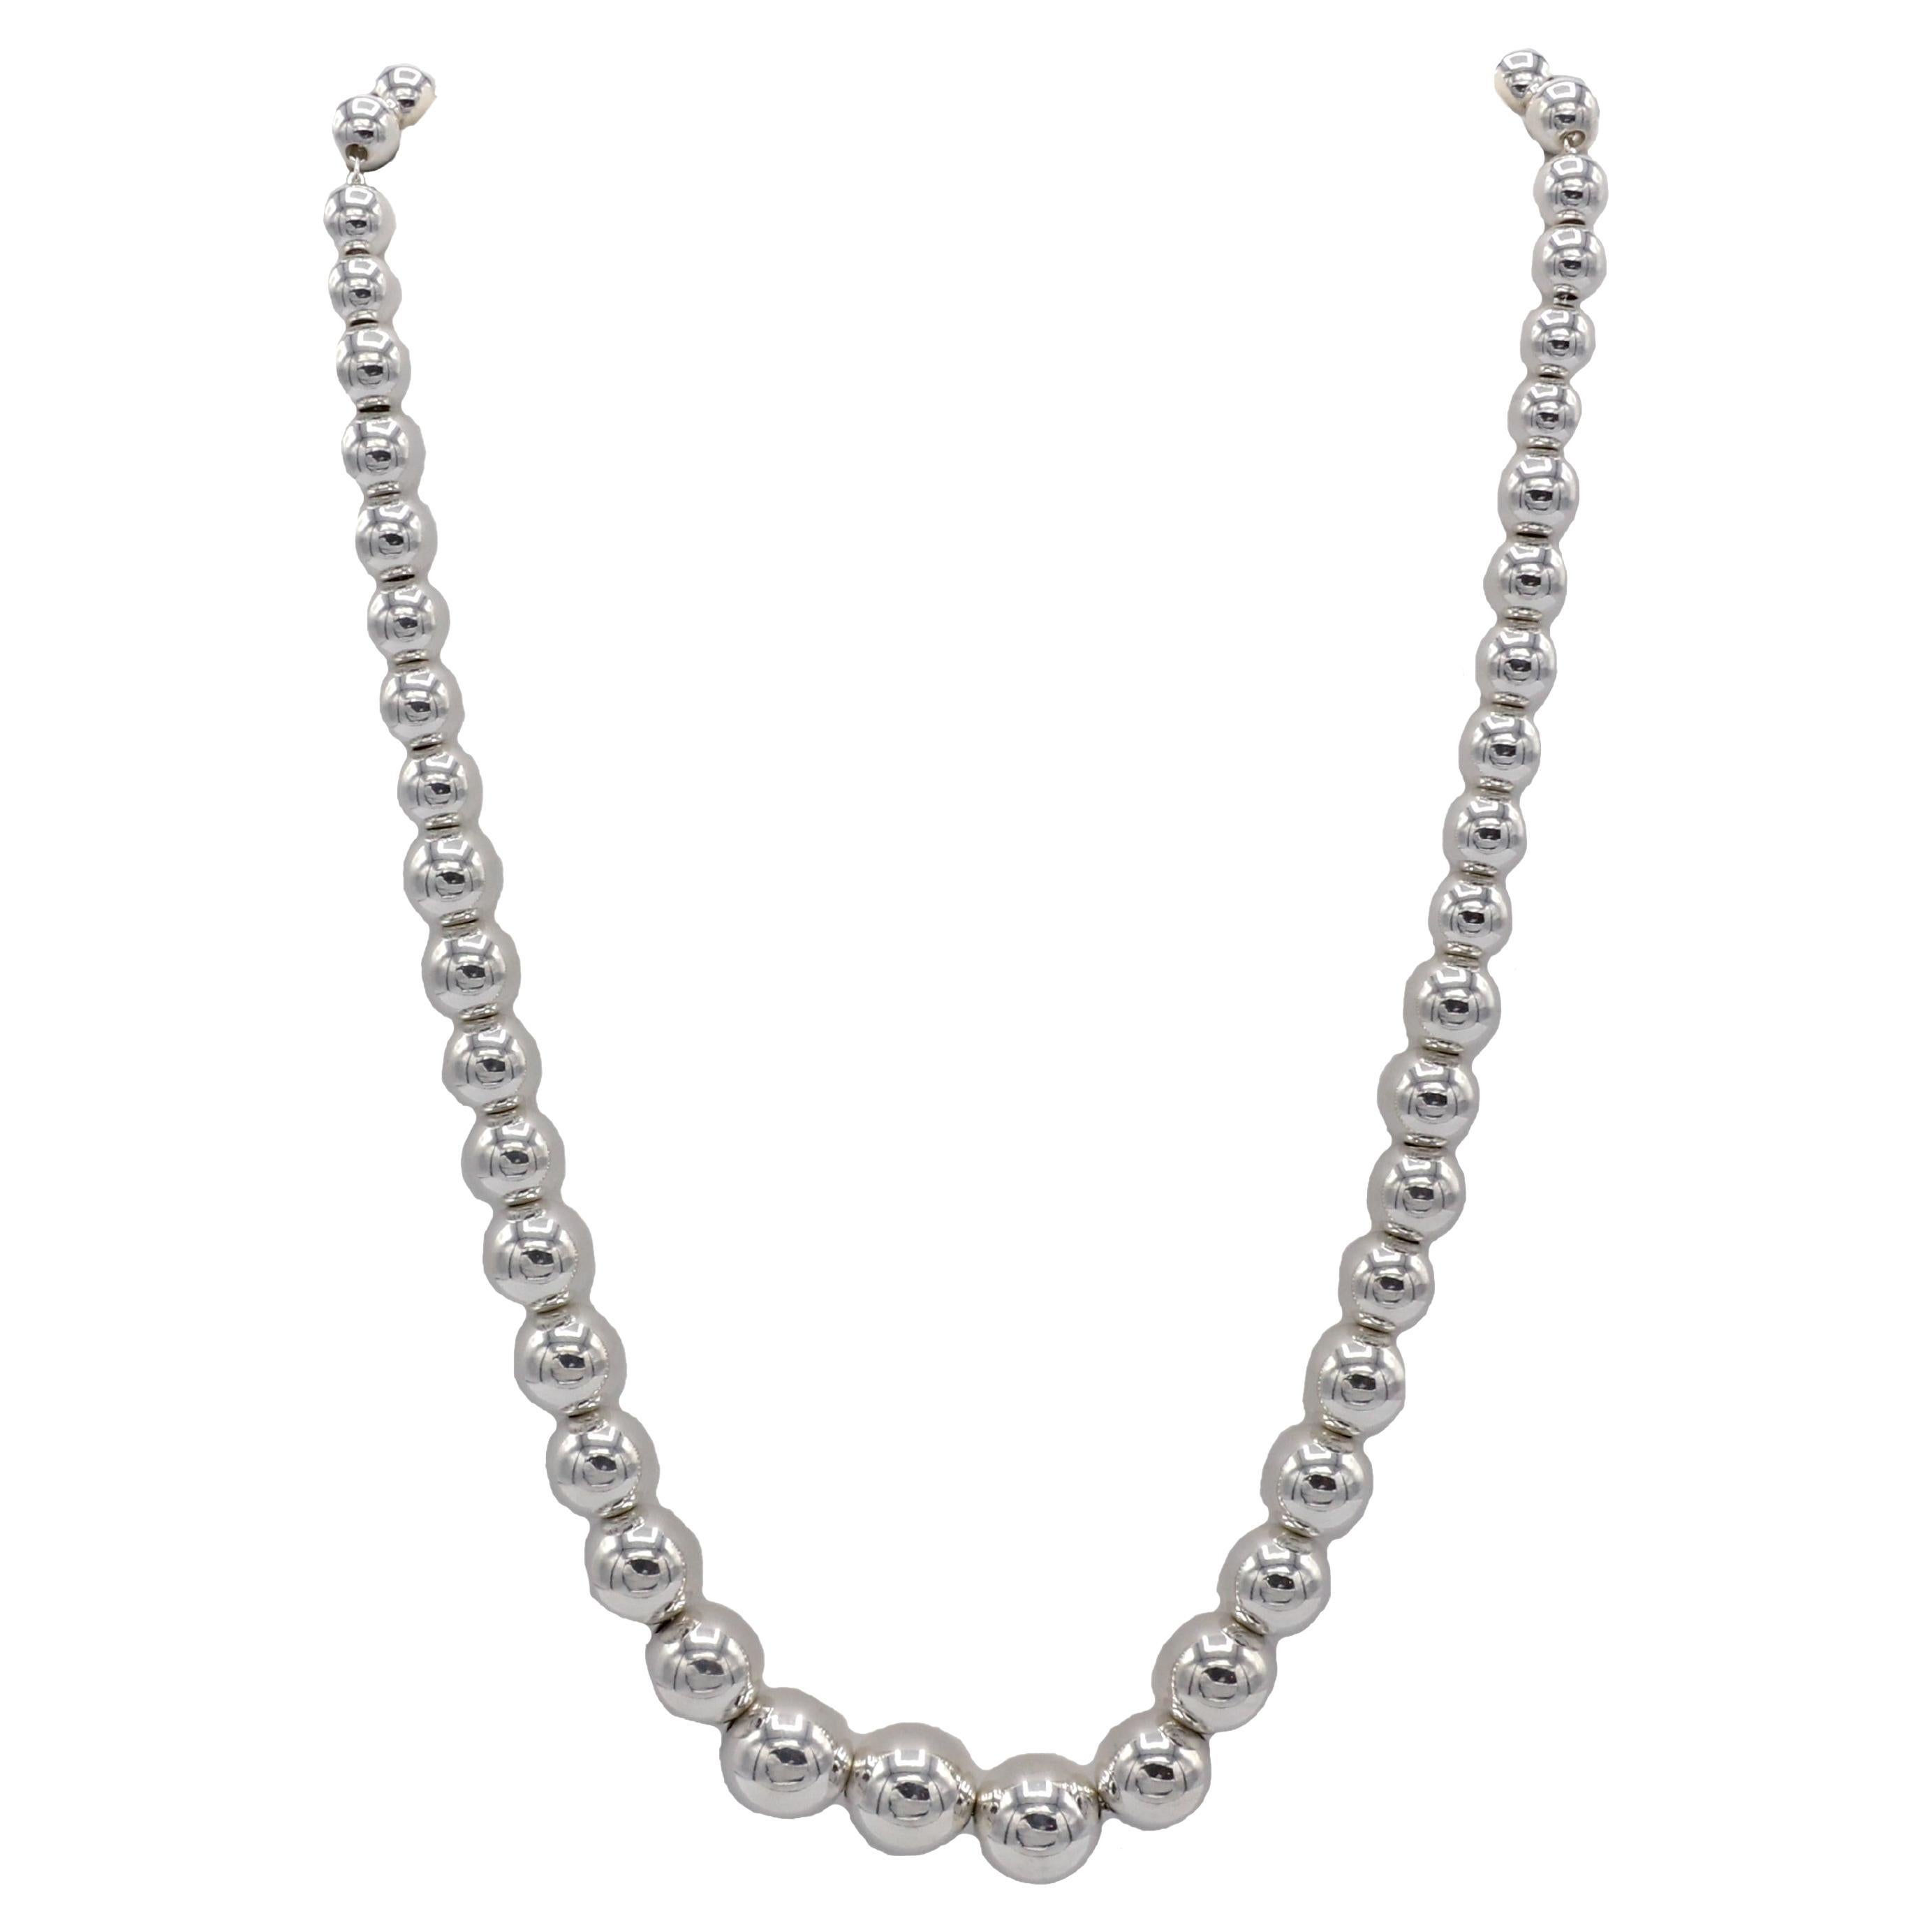 Tiffany & Co. Collier de perles graduées en argent Sterling Hardware Ball and Ball